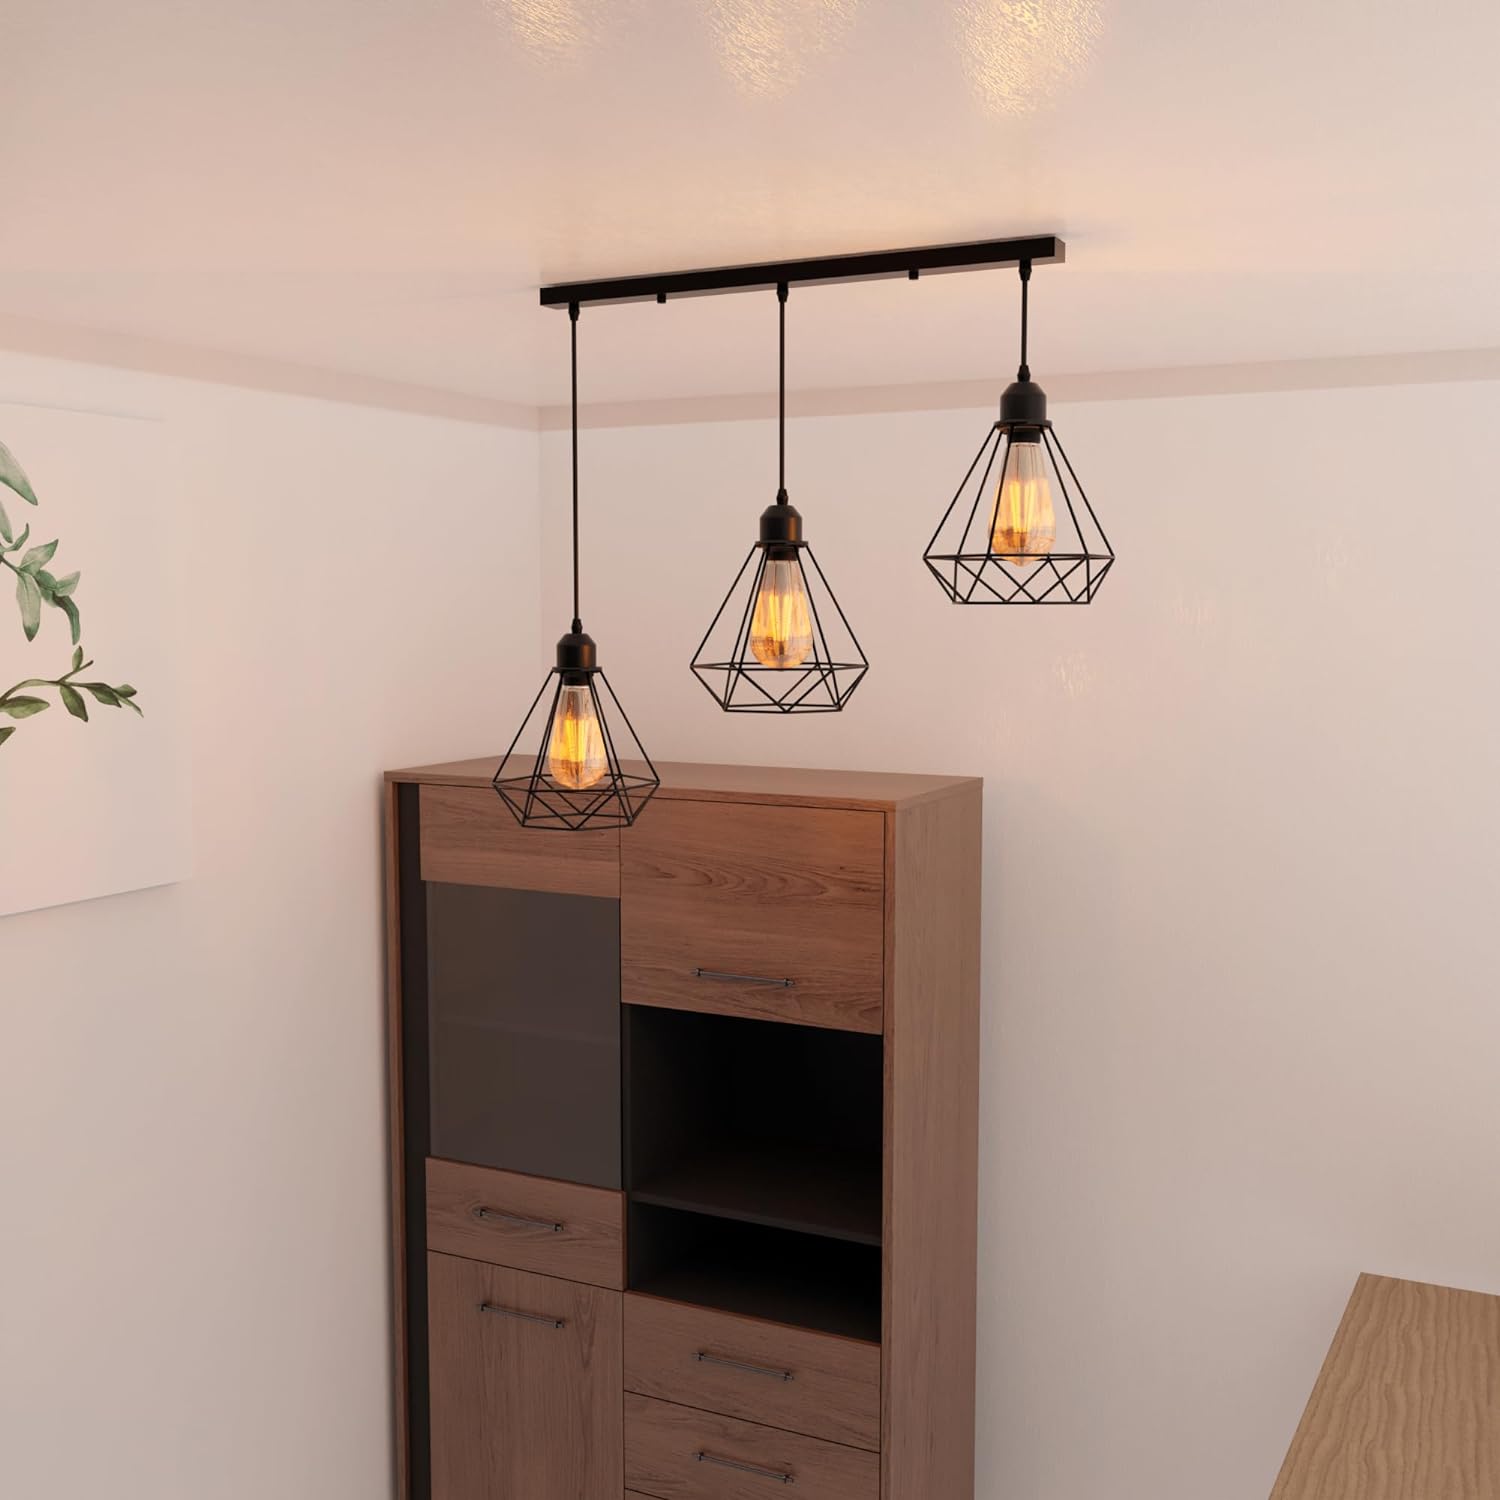 3 light cage hanging ceiling light